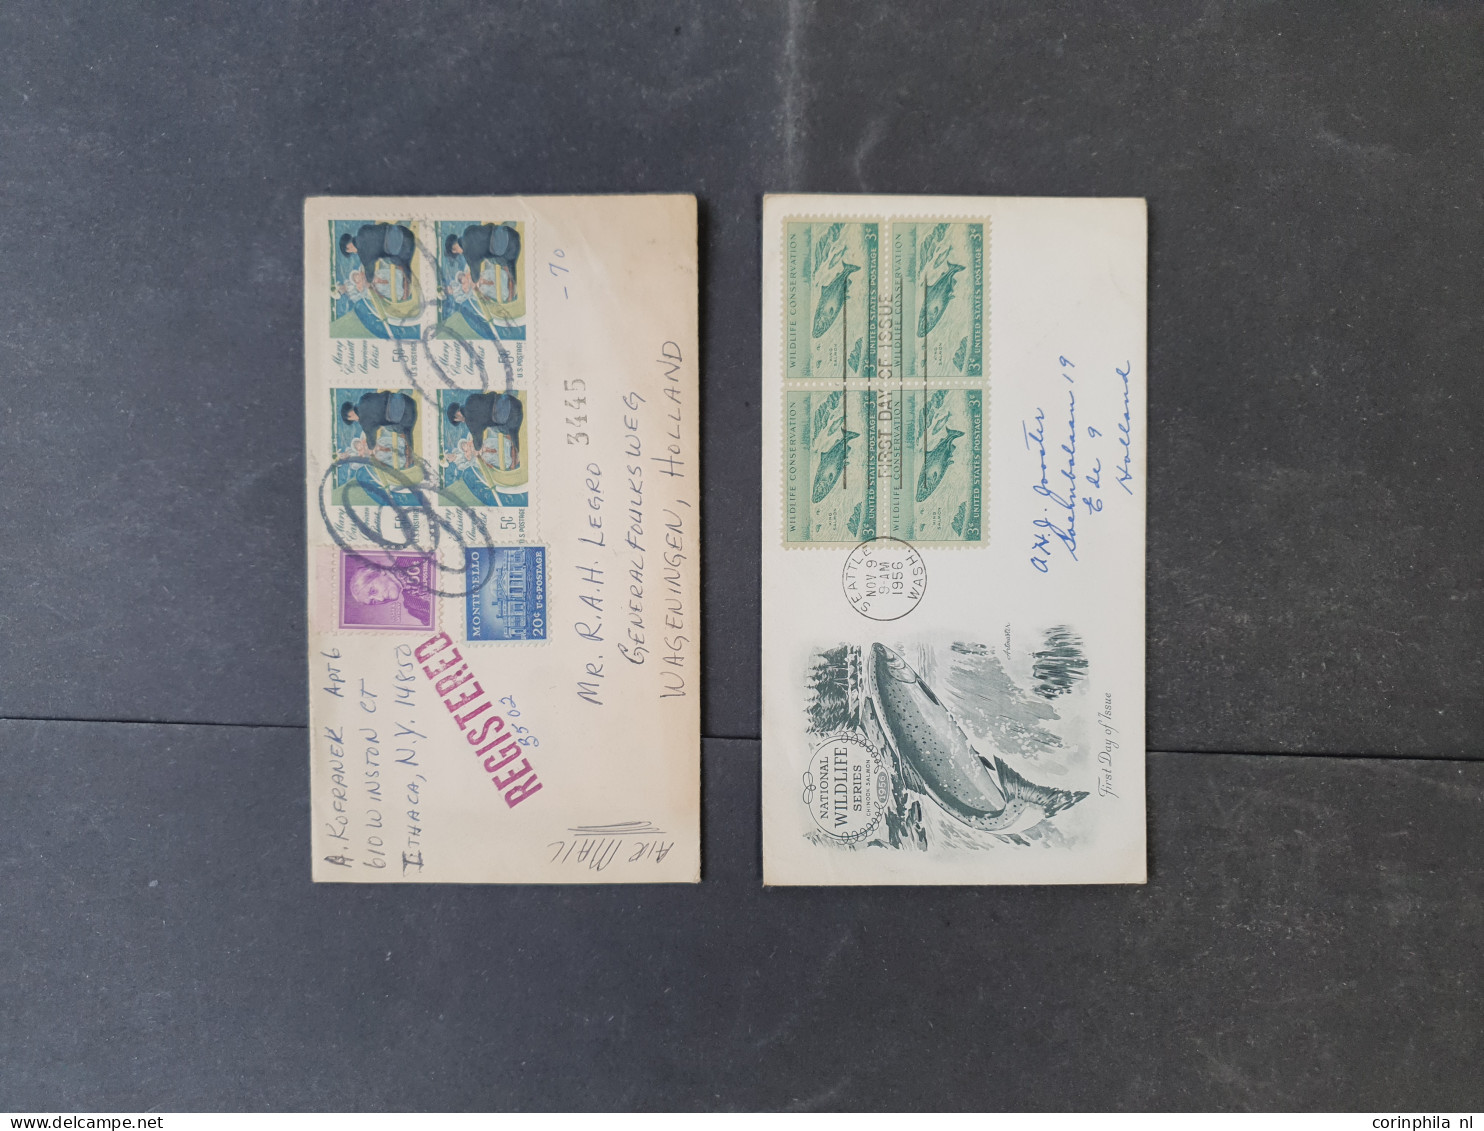 Cover 1923 onwards a large number of cover with Topical issues (Birds, Fishes etc.) and Switzerland in box